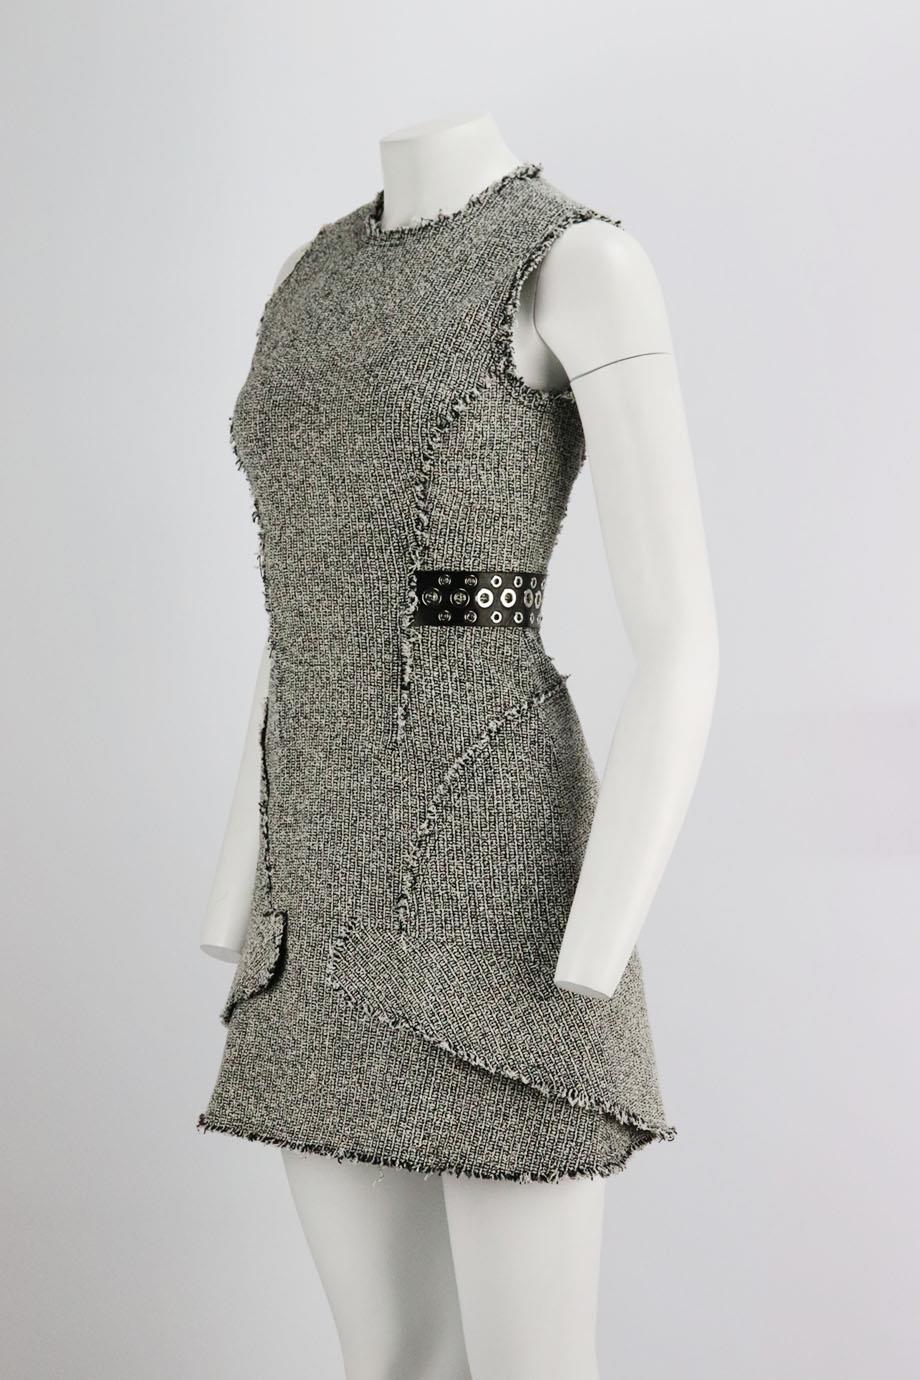 This mini dress by Alexander Wang is cut for a slim-fit from cotton-blend tweed, this mini dress finished with leather and silver-tone eyelet embellishment at the waist. Grey cotton-blend. Zip fastening at back. 70% Cotton, 11% viscose, 8% acrylic,